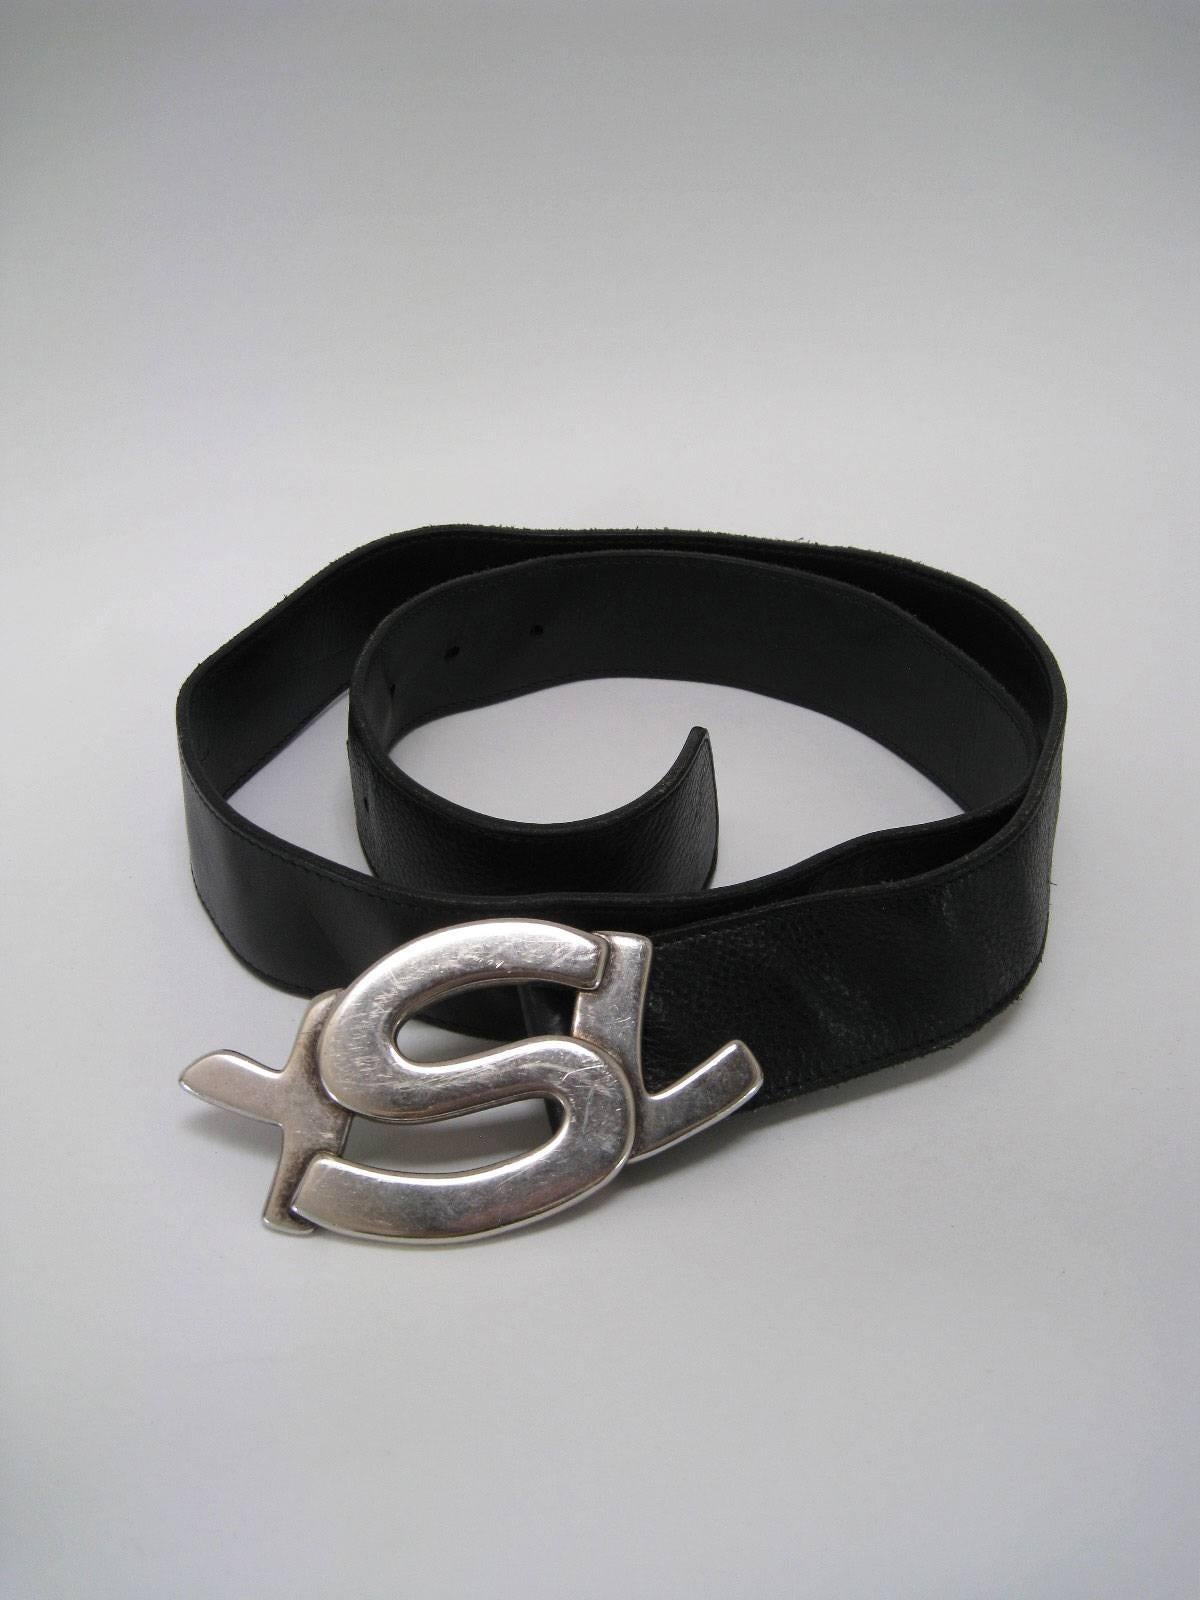 Large YSL logo belt buckle and belt.

Heavier weight silver tone metal YSL buckle.

Wide black pebbled leather belt.

Marked size 40.

Made in Italy.

This item is in good pre-owned condition with wear to belt that can be see in images. Leather has